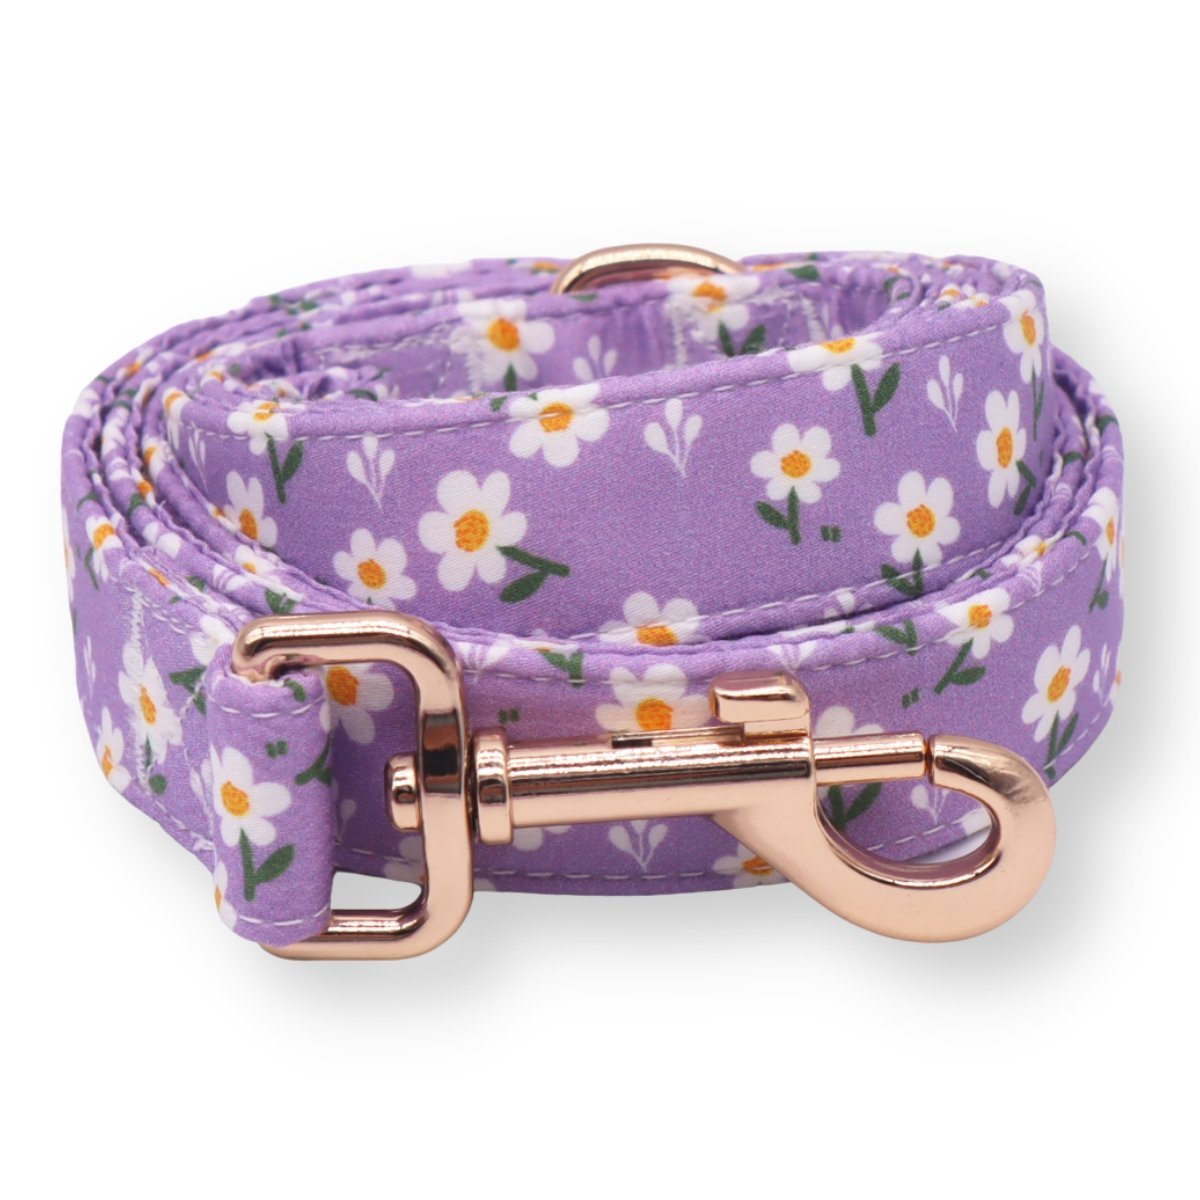 cute dog leashes for walking - dog leash types